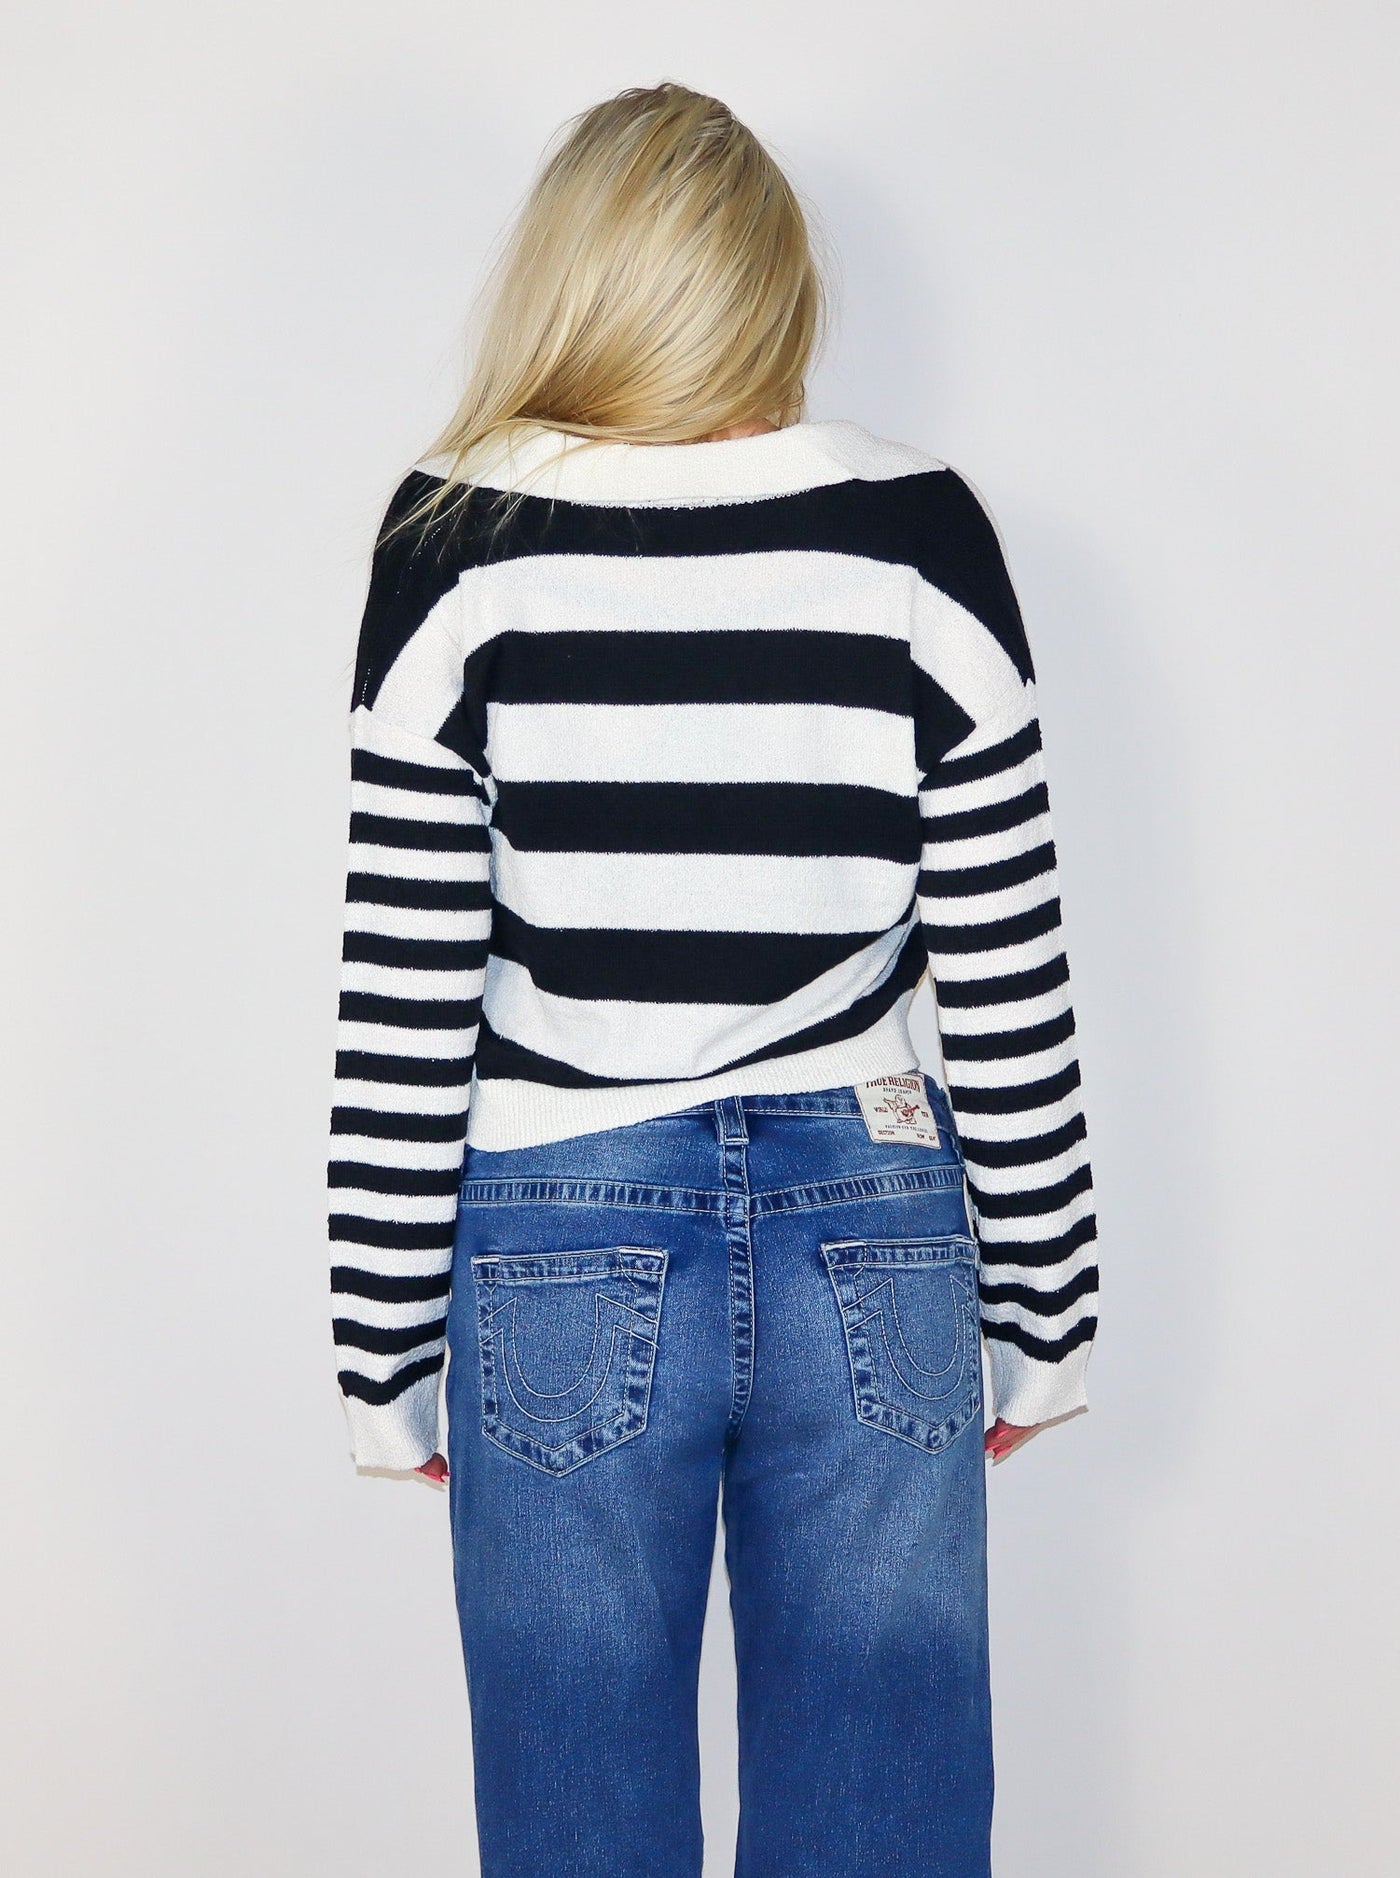 Model is wearing a cropped horizontal stripped black and white sweater. Worn with blue jeans. 